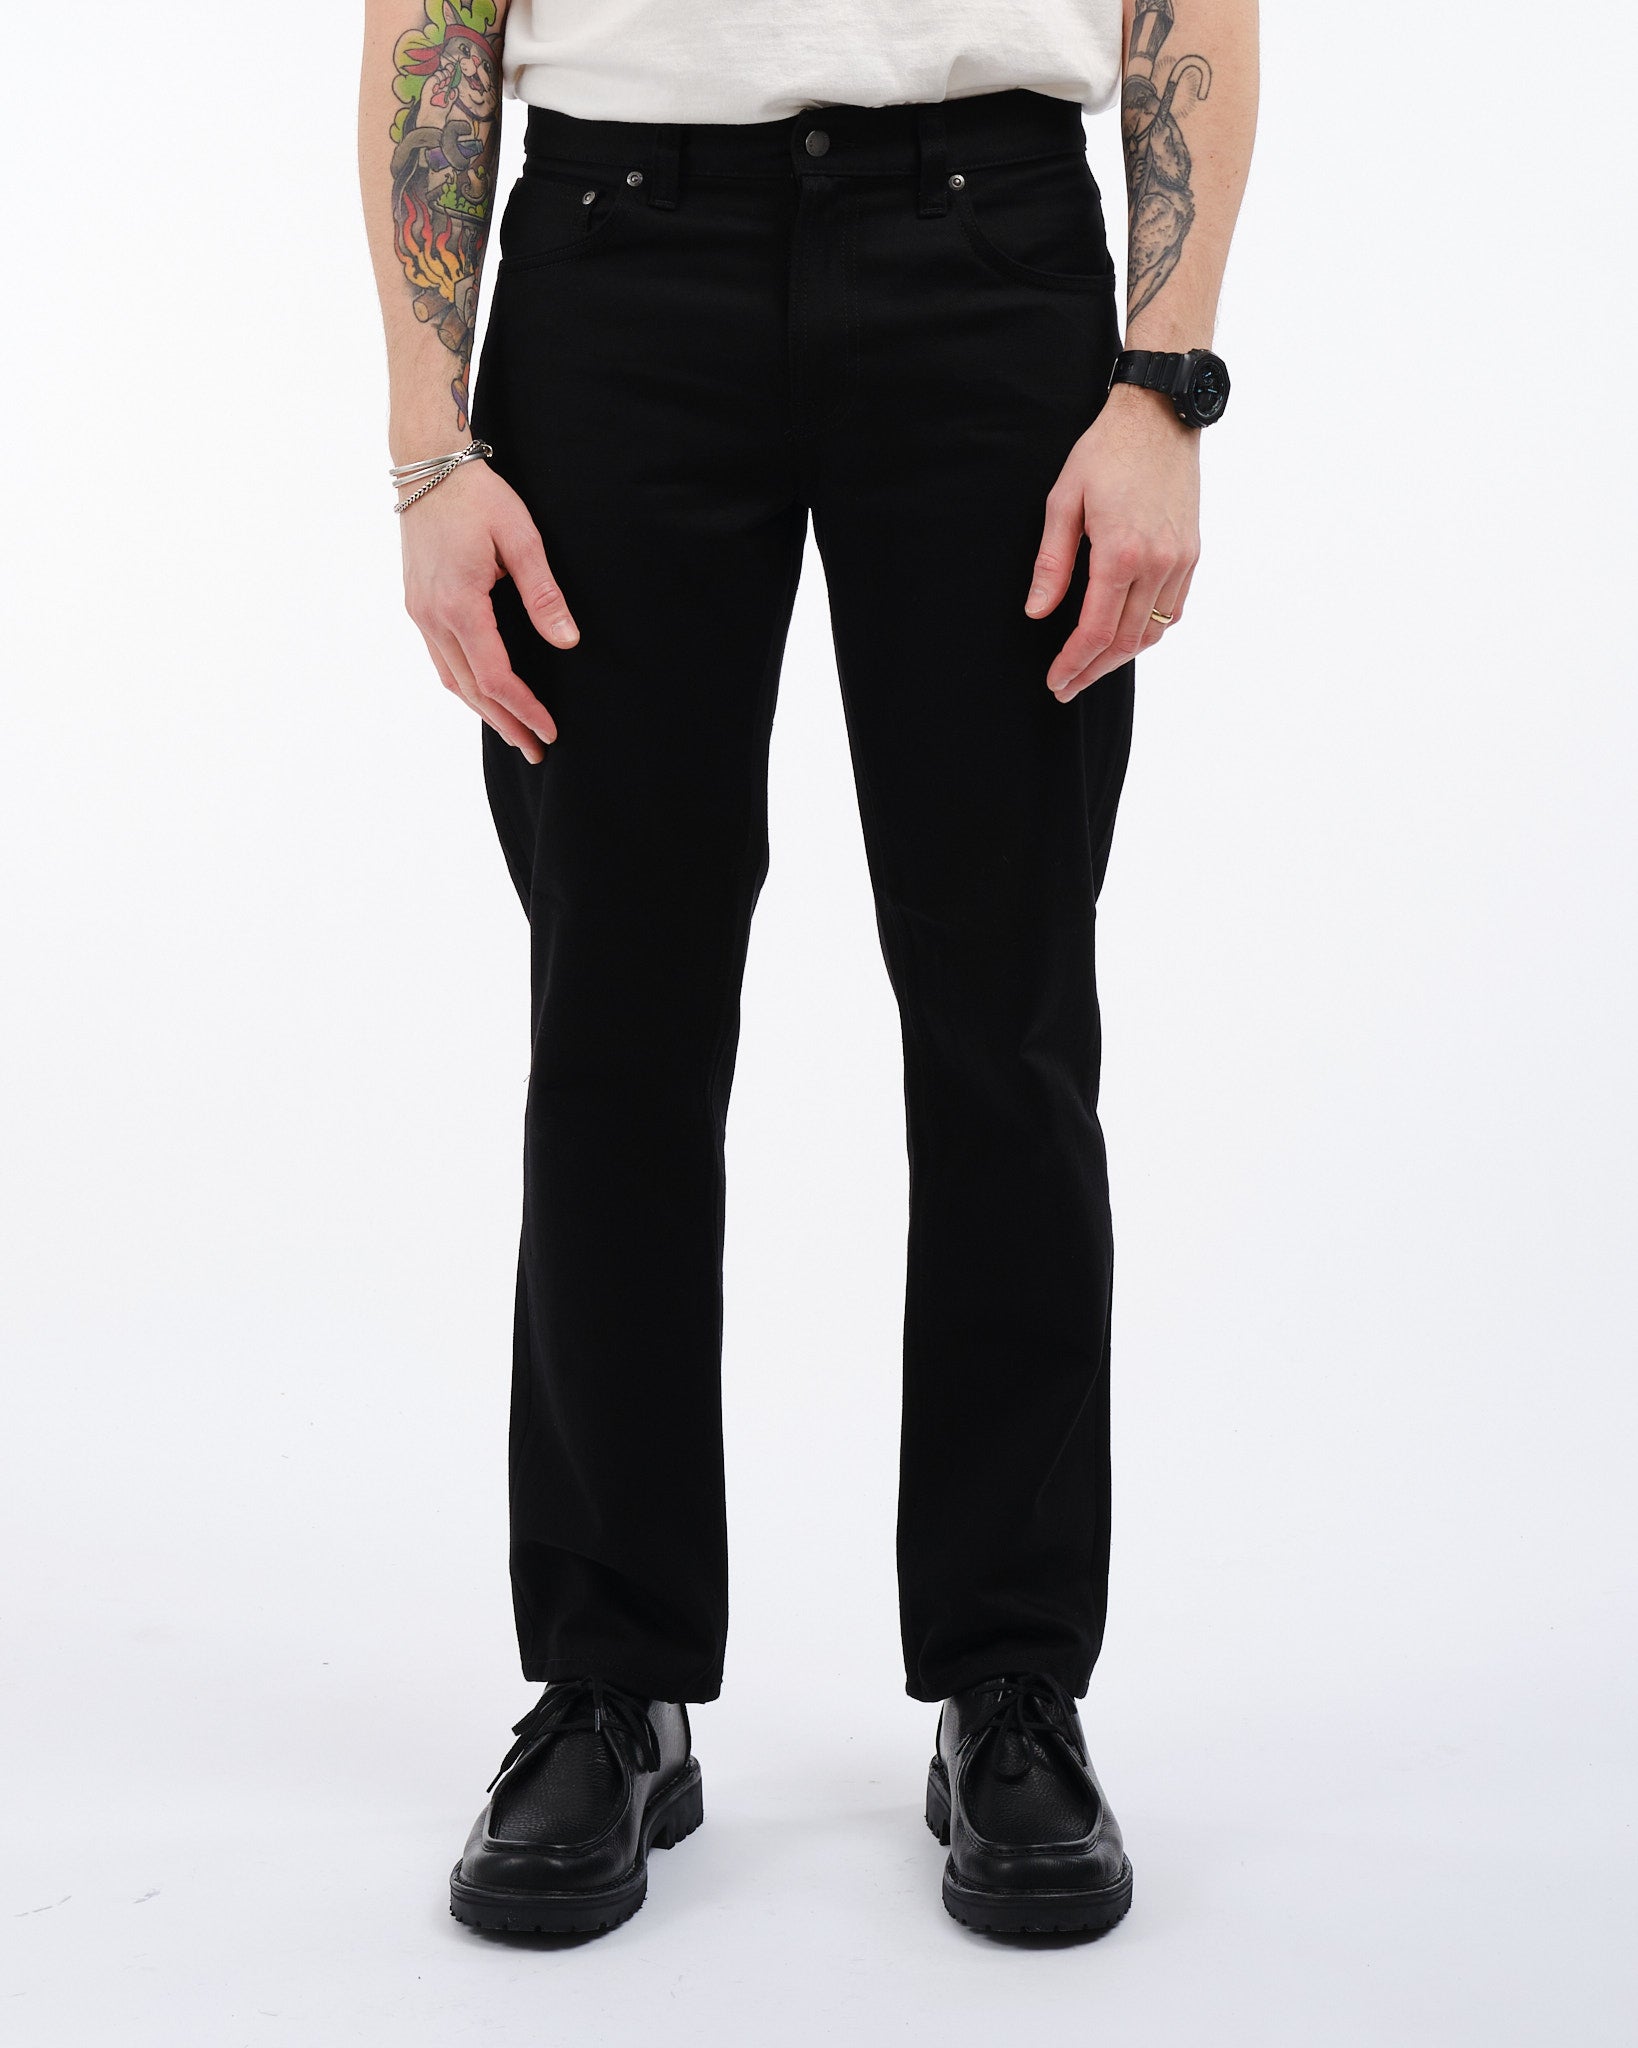 Gritty Jackson Jeans Dry Everblack - Meadow